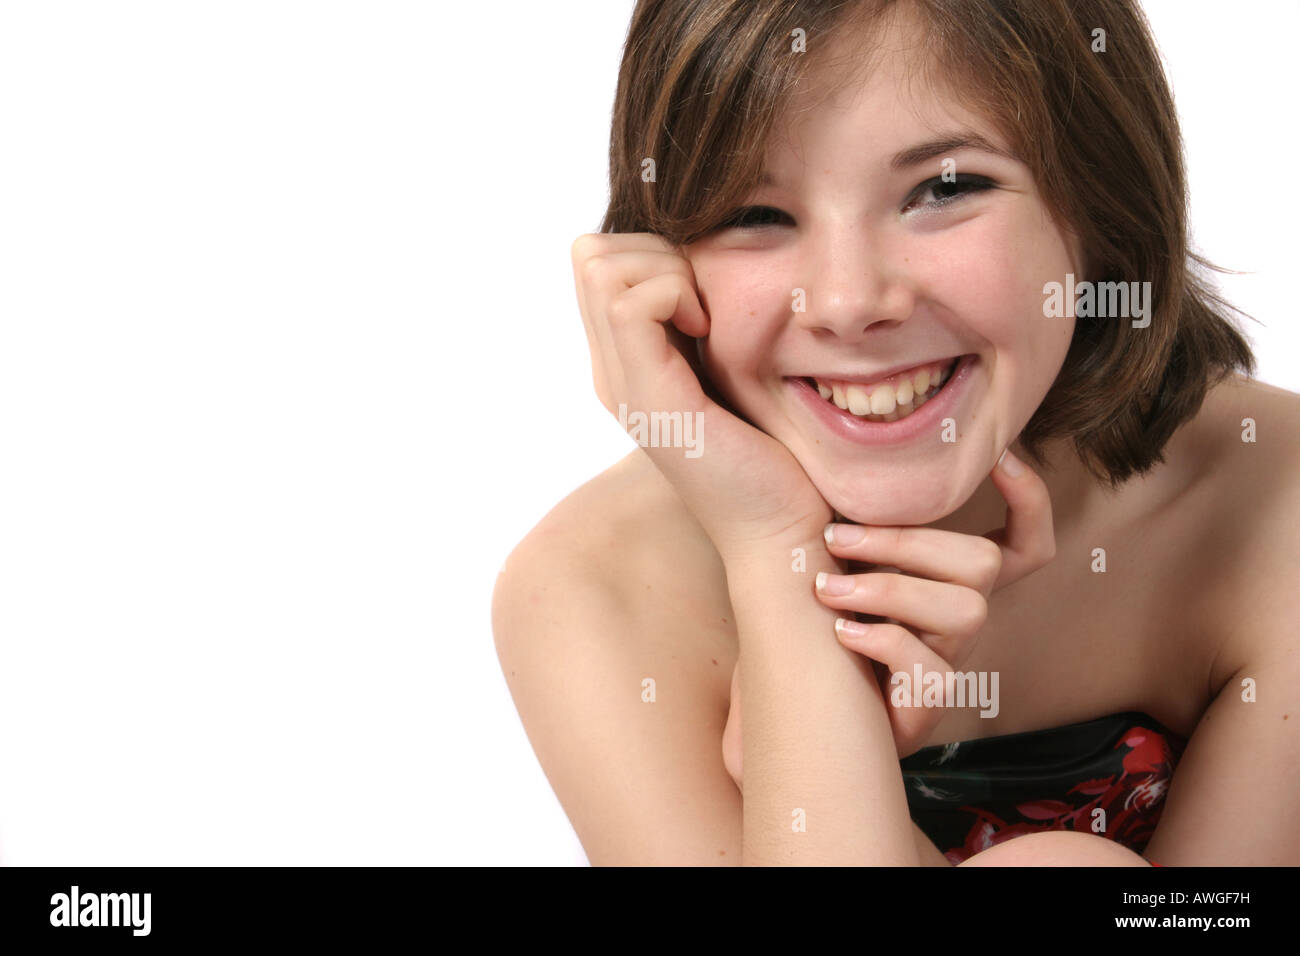 A modern portrait of a thirteen year old girl. Stock Photo